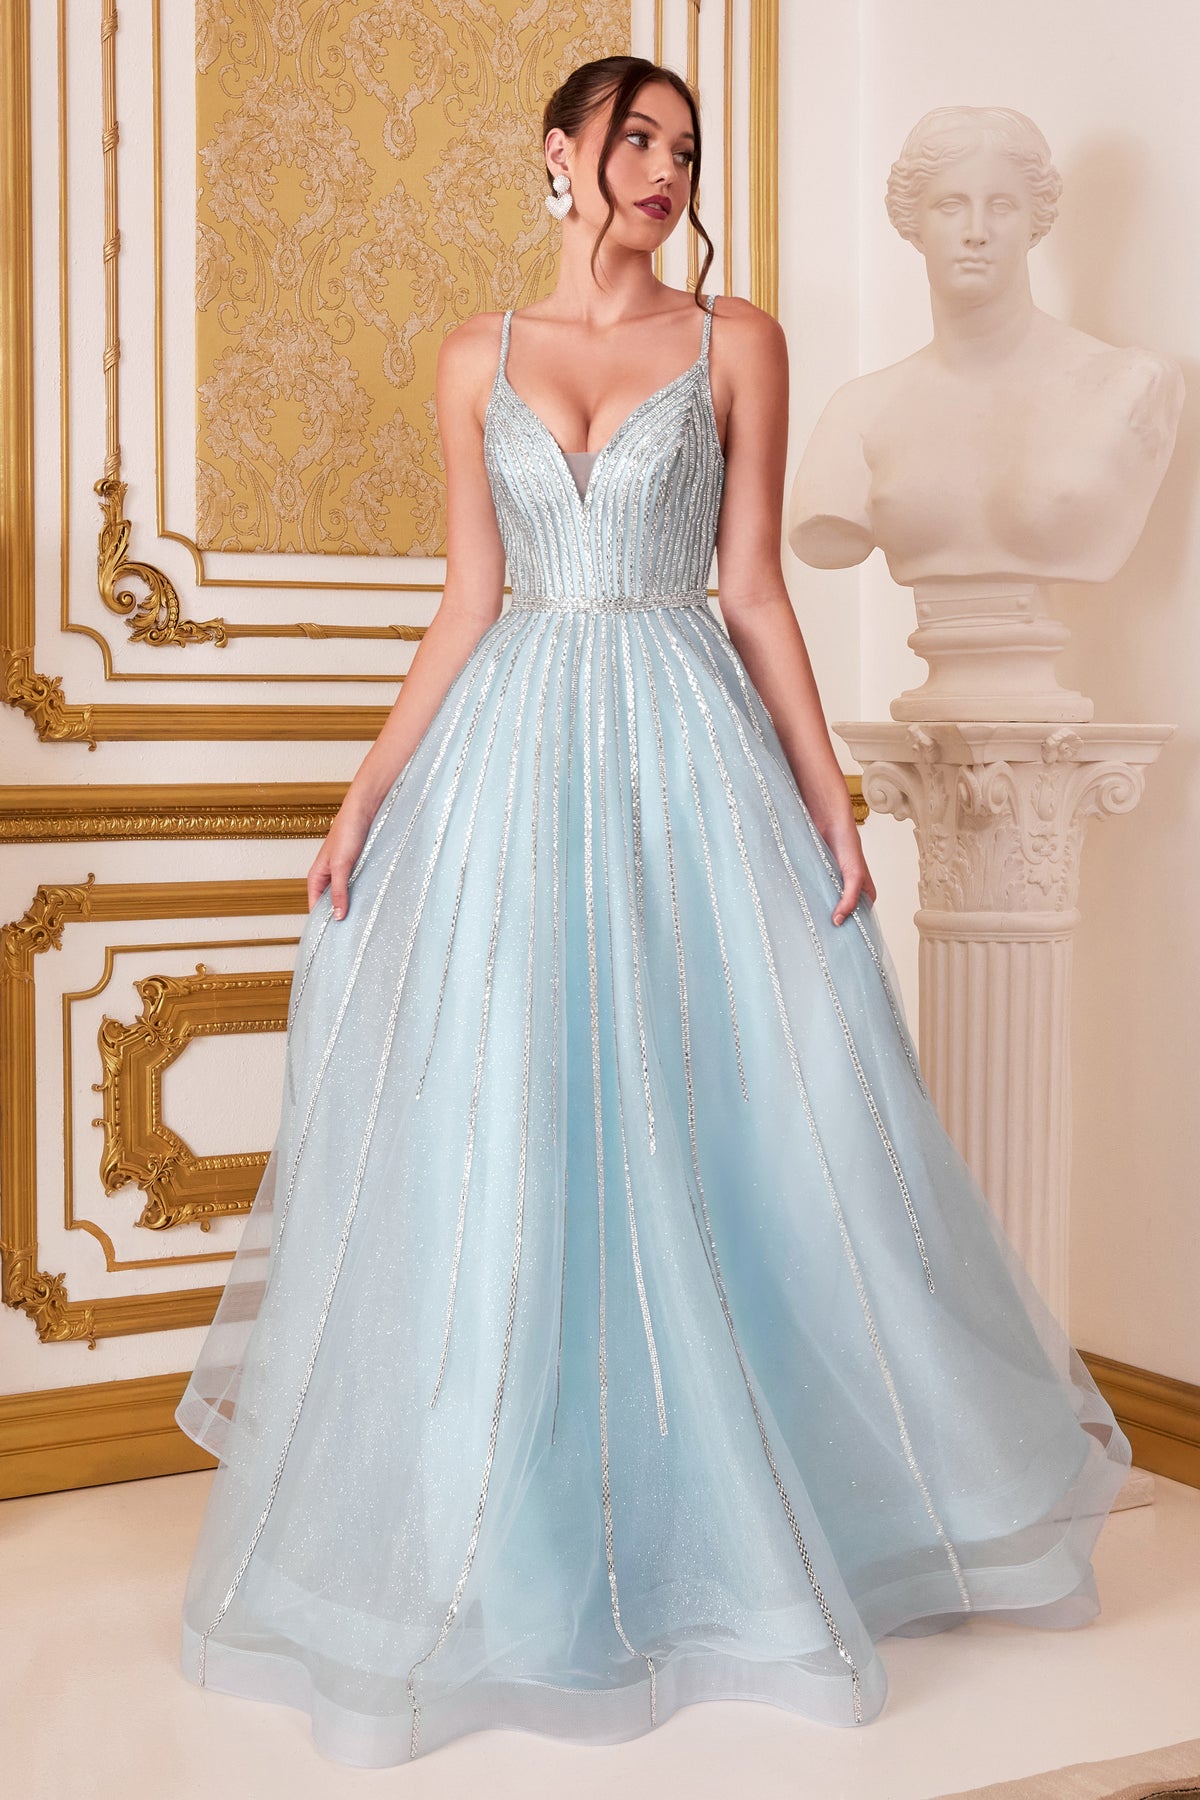 Elegant Long Gown with Deep Neckline and Shimmery Skirt Overlay Ladivine CD940 - NORMA REED